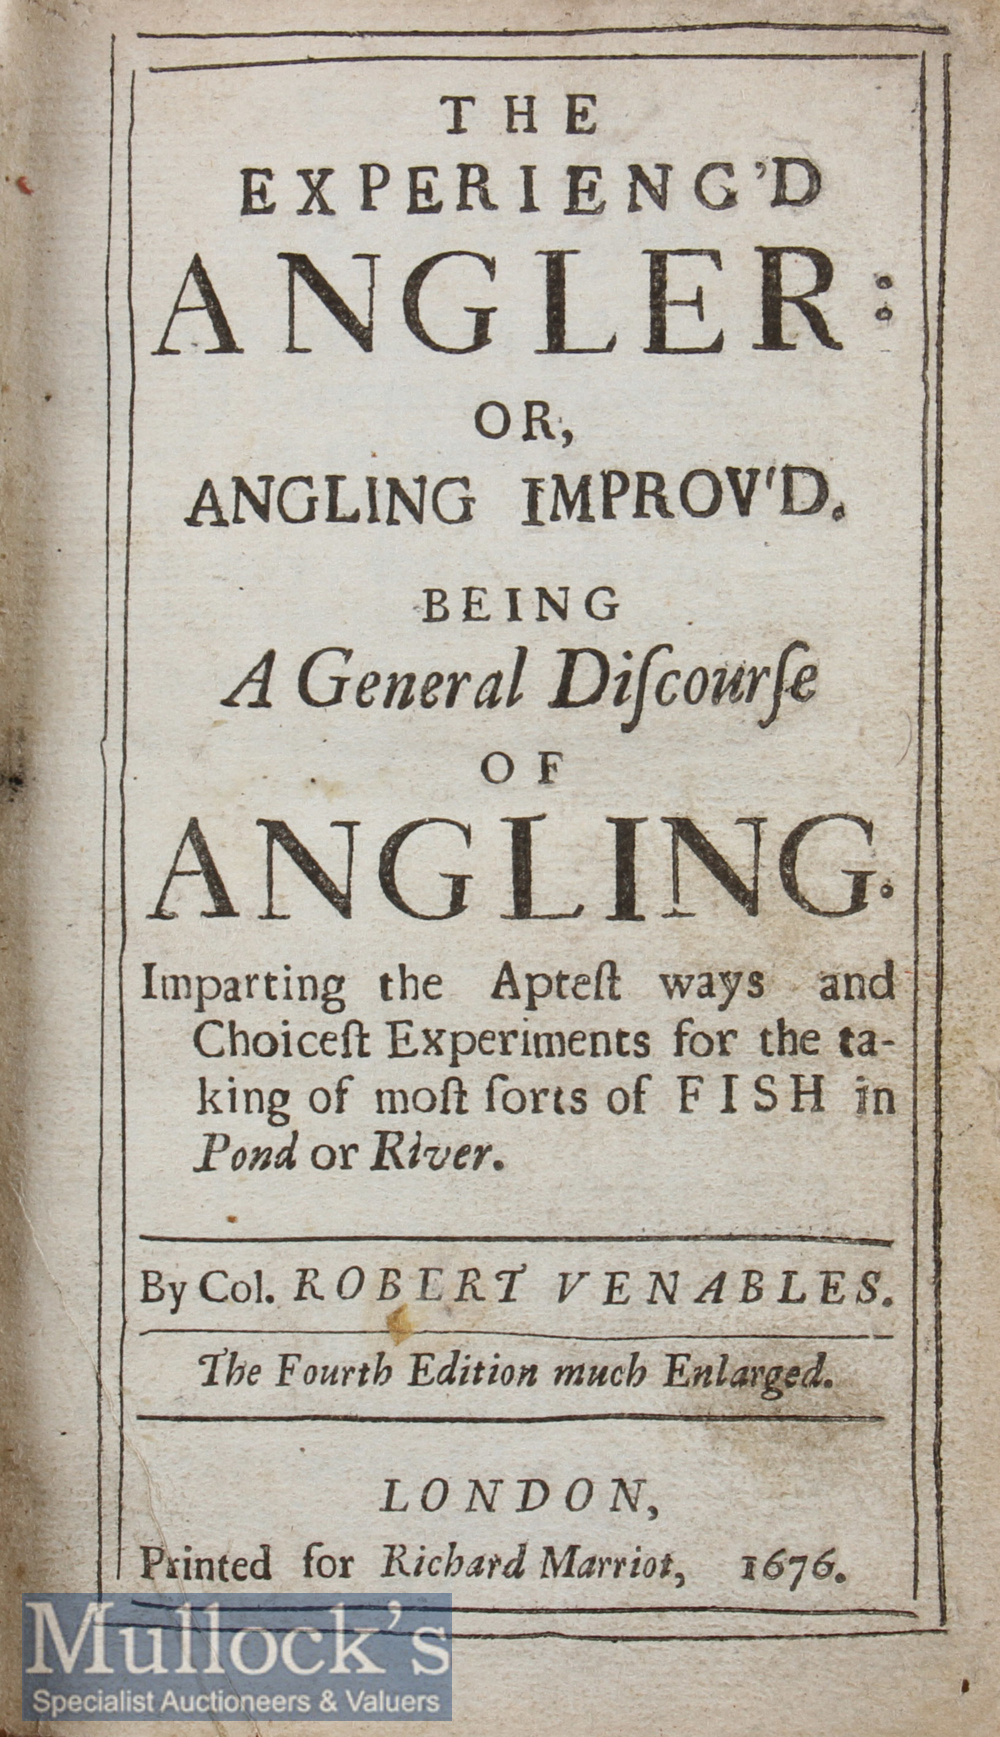 Rare Angling Book dated 1676 - author Col Robert Venables - “The Experience’d Angler: or Angling - Image 2 of 2